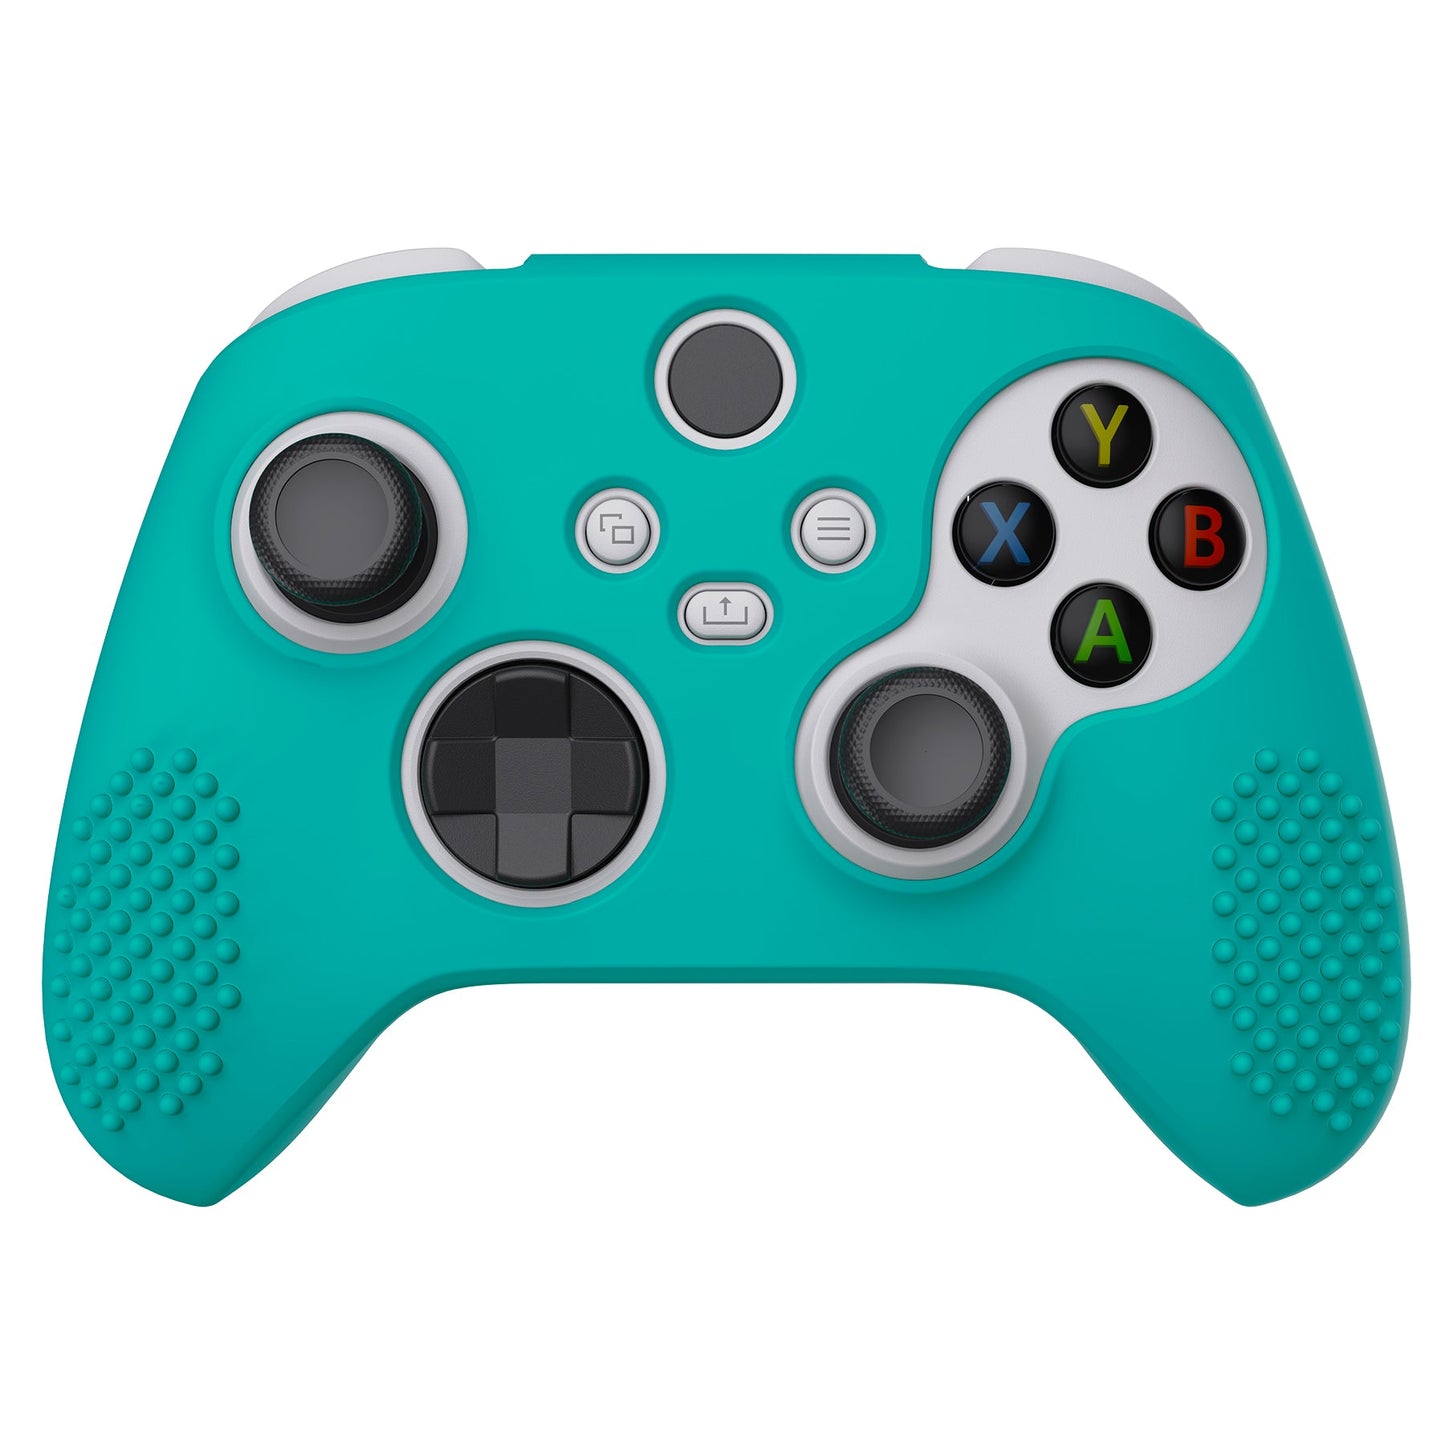 PlayVital Aqua Green 3D Studded Edition Anti-slip Silicone Cover Skin for Xbox Series X Controller, Soft Rubber Case Protector for Xbox Series S Controller with 6 White Thumb Grip Caps - SDX3010 PlayVital